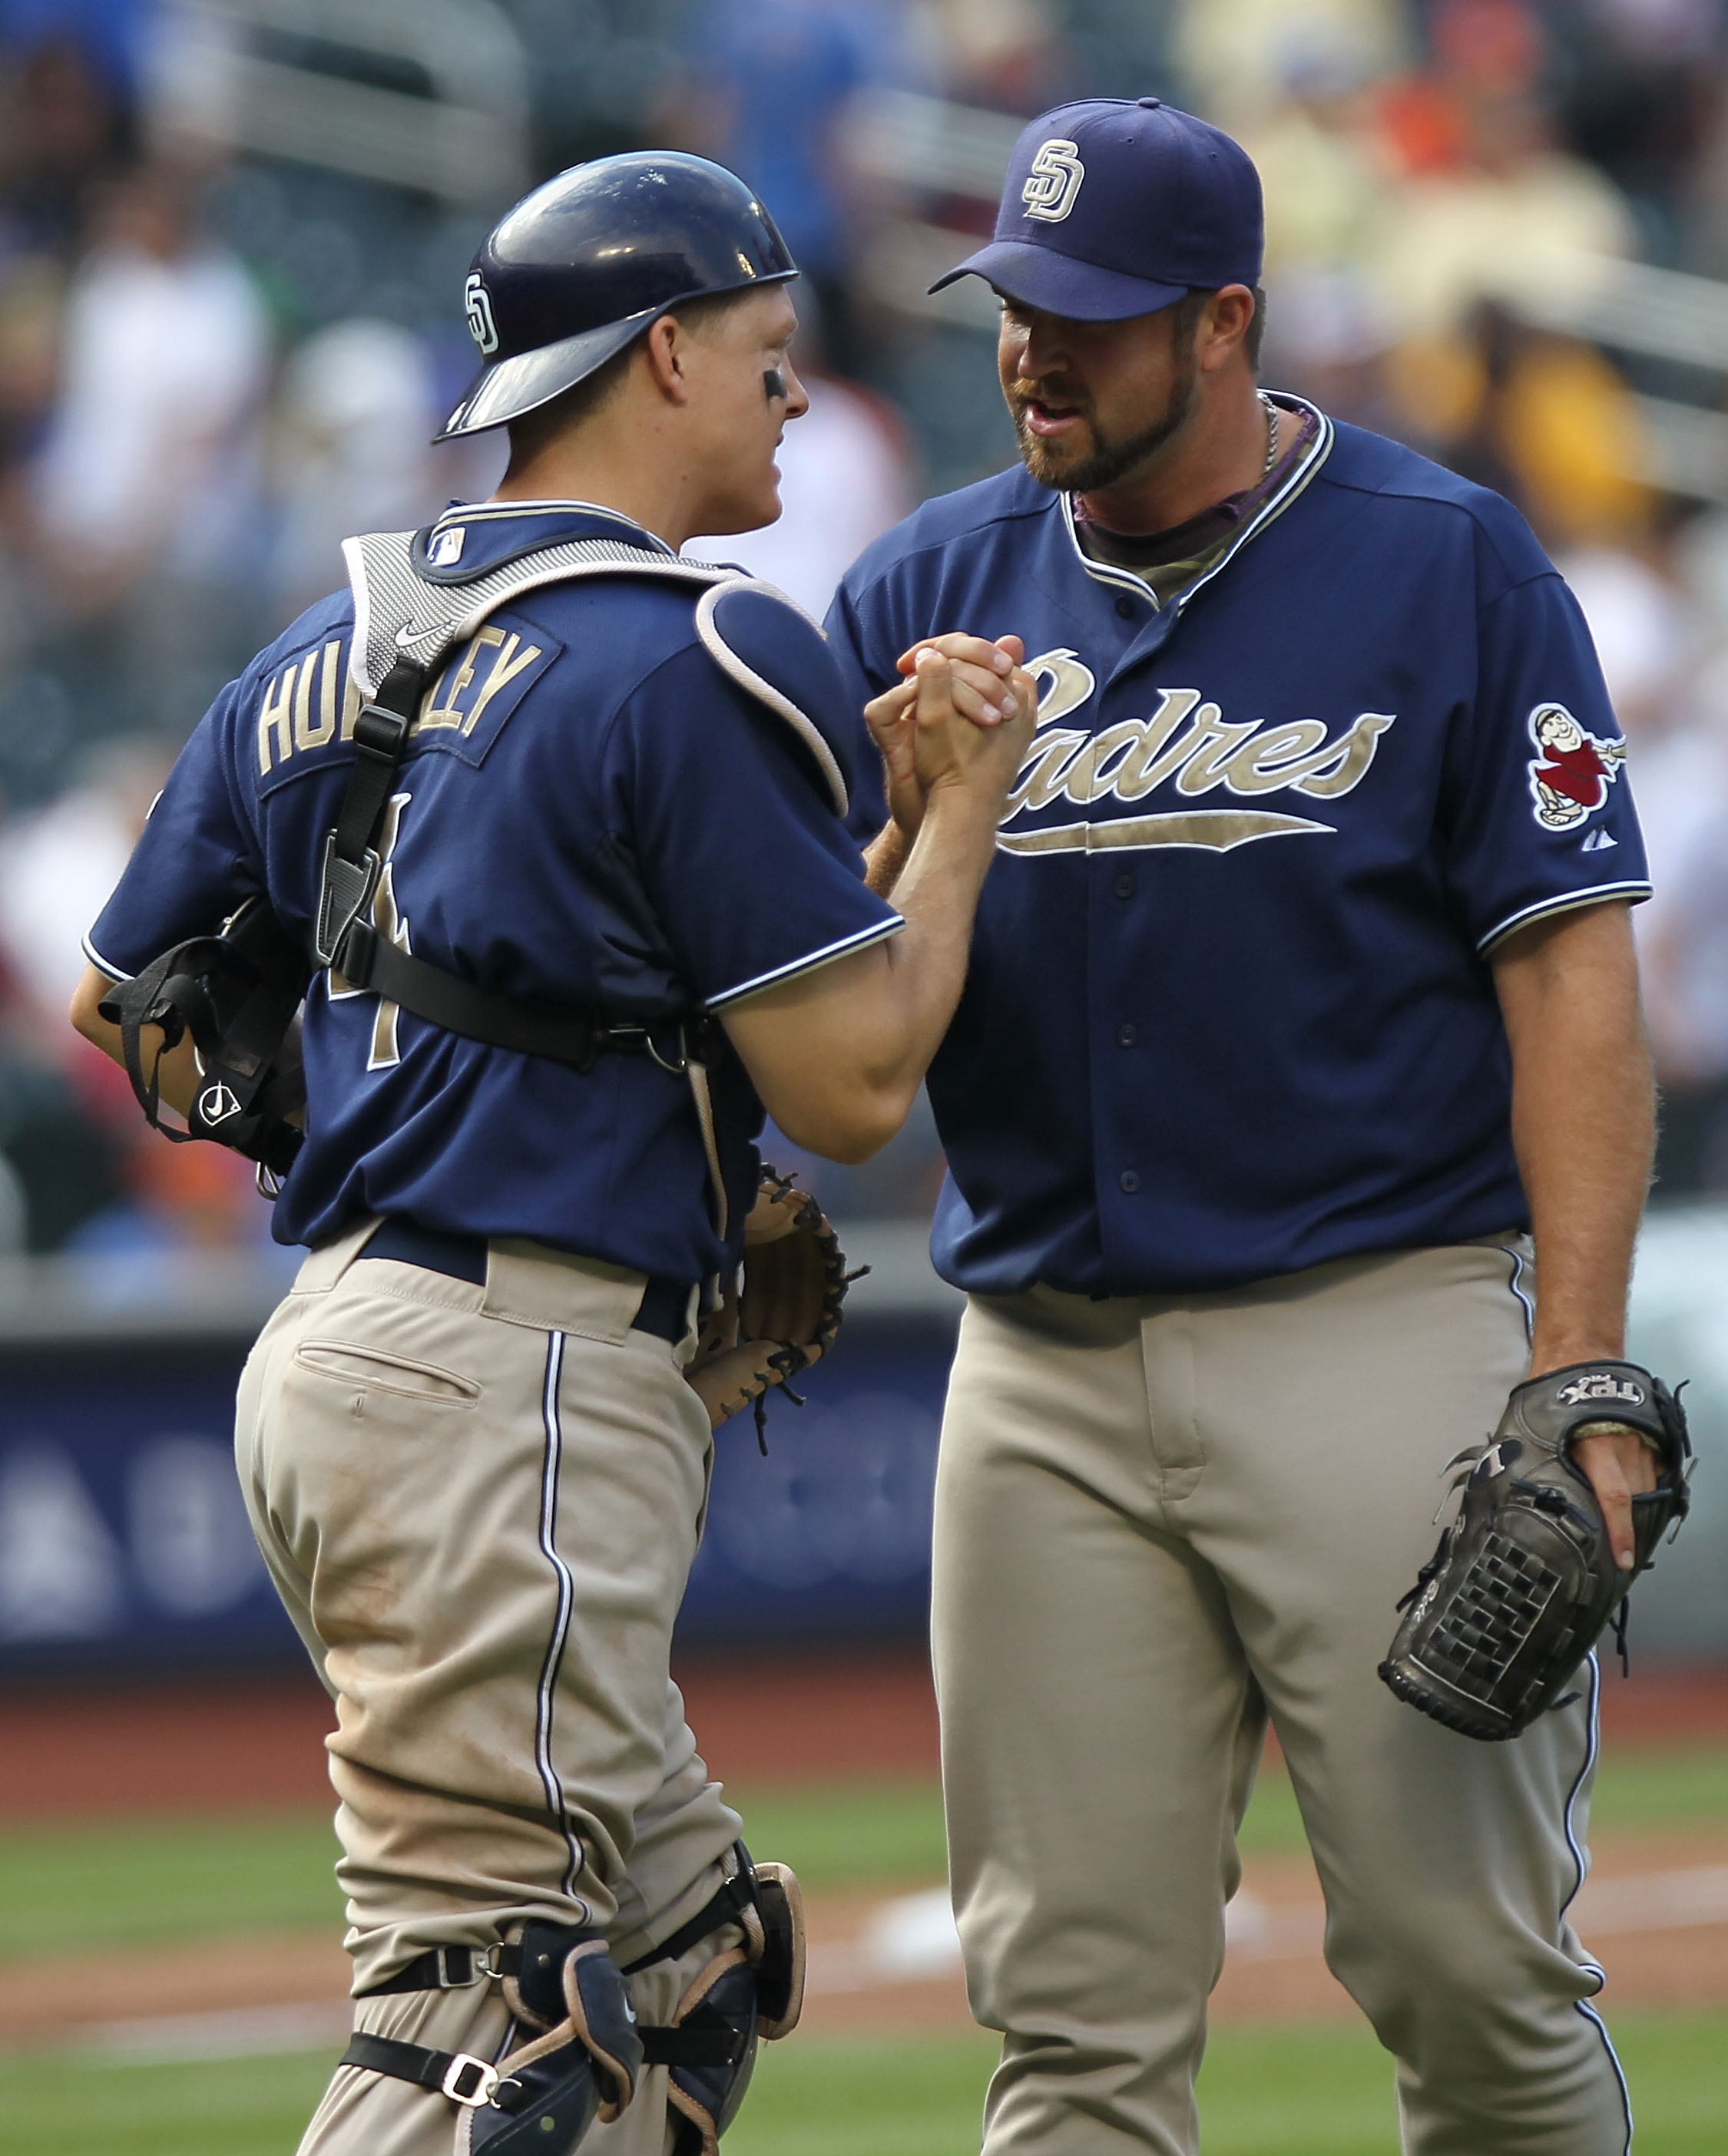 NEW YORK - JUNE 10:  Heath Bell #21 of the San Diego Padres celebrates the win with catcher Nick Hundley #4 against the New York Mets at Citi Field on June 10, 2010 in the Flushing neighborhood of the Queens borough of New York City.  (Photo by Nick Laham